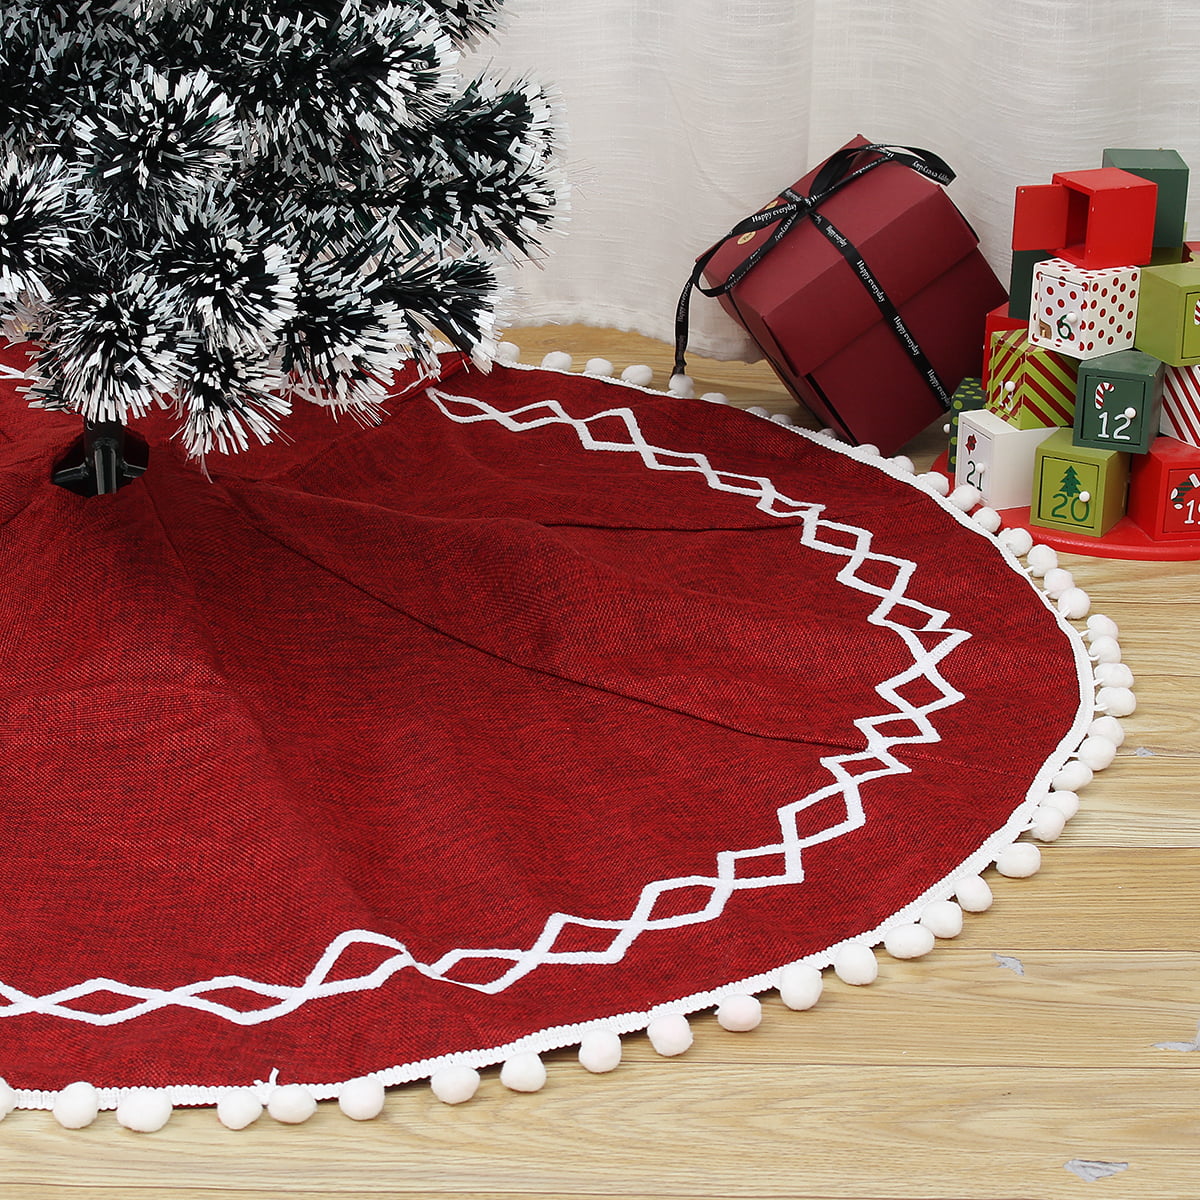 Details about   48" plush red and white Christmas tree skirt faux fur w 4" white cuff New 